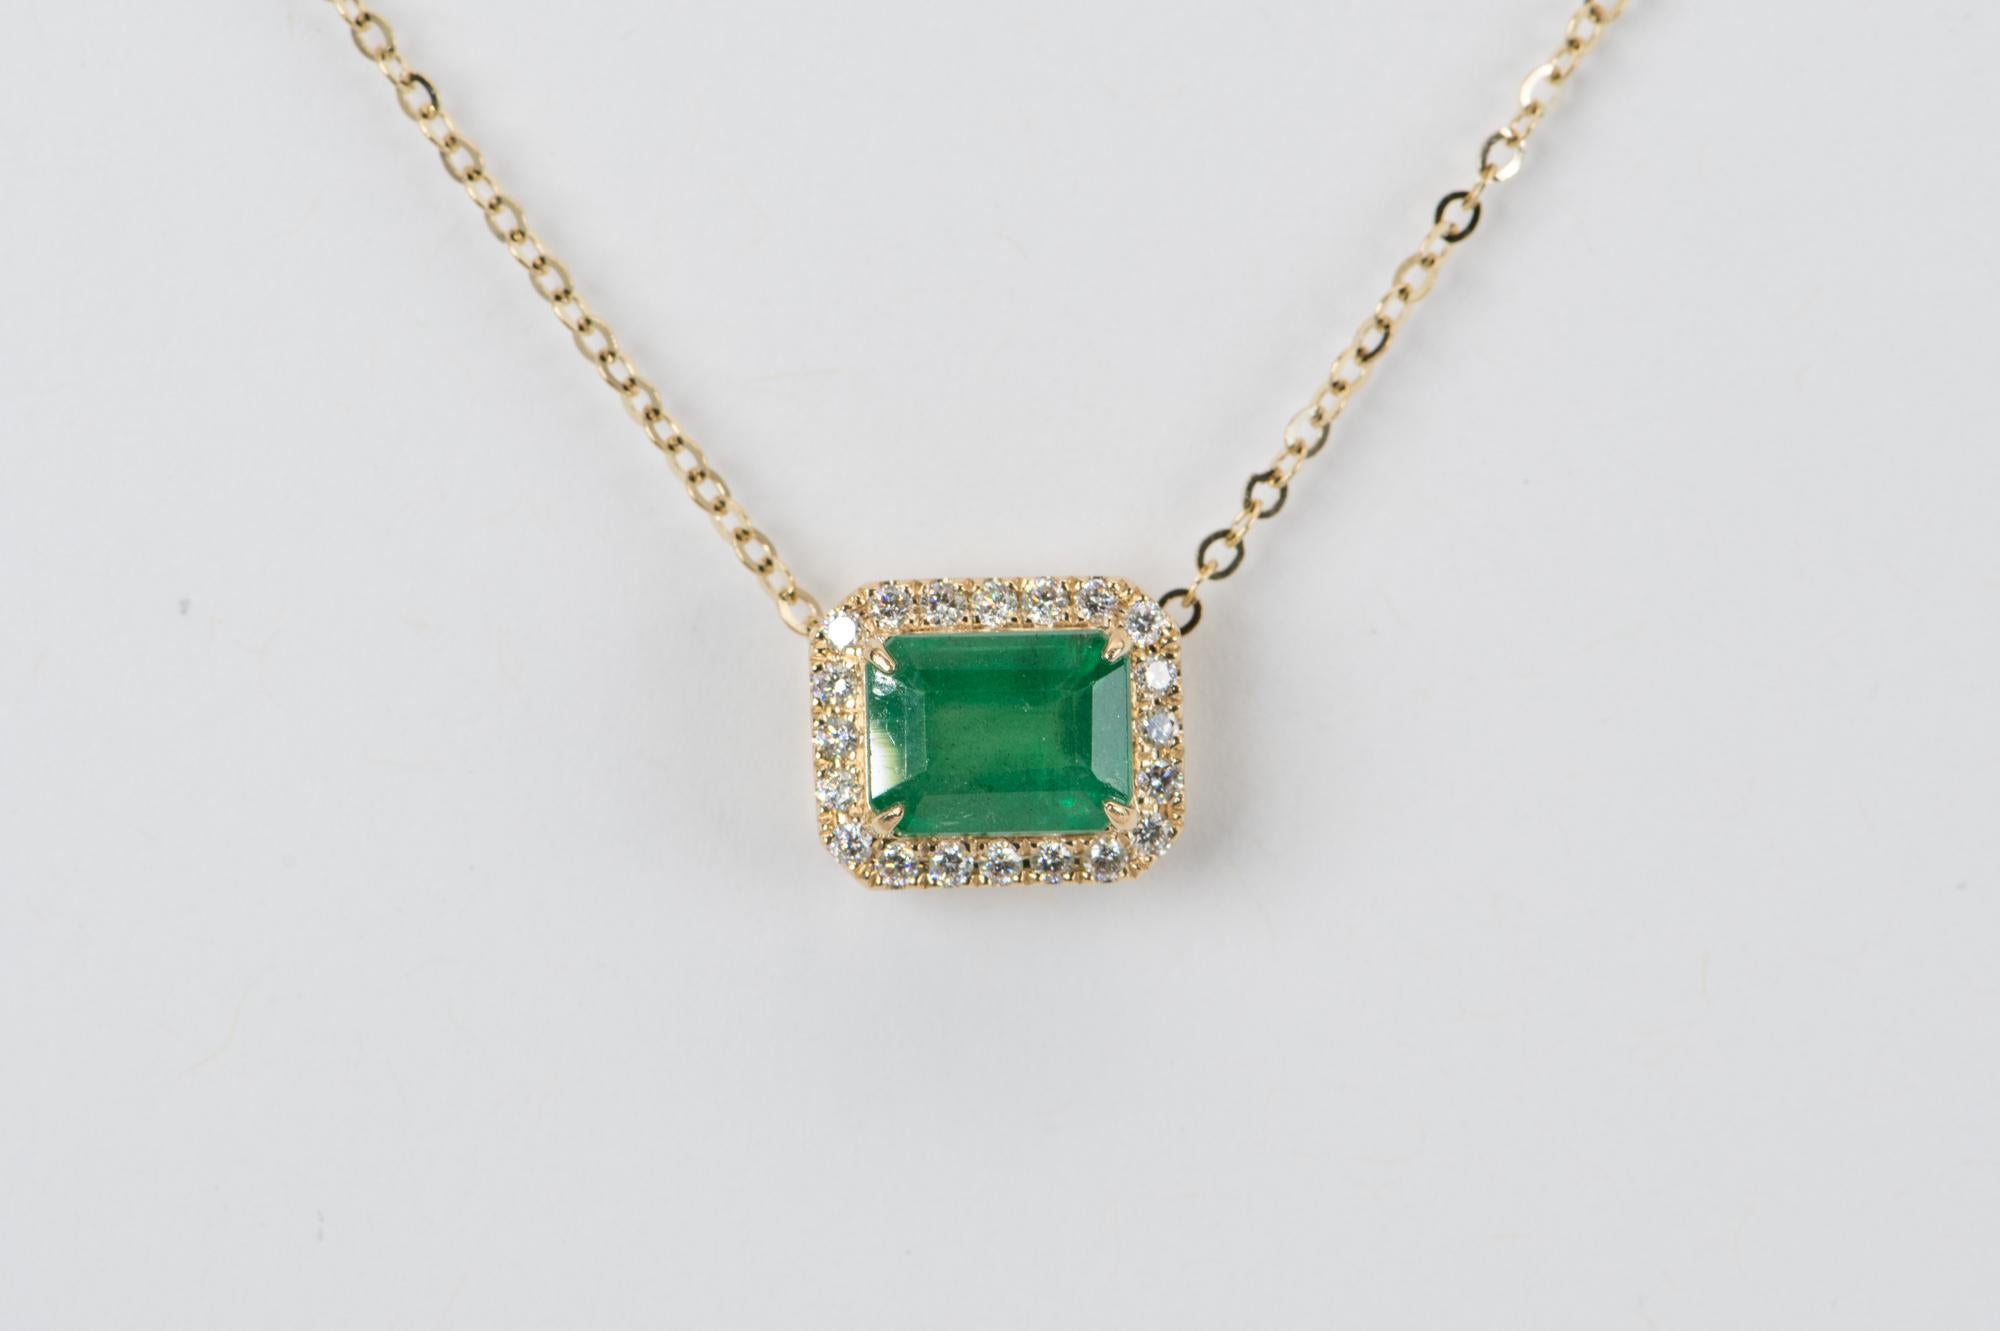 Emerald Cut 1.74ct Emerald with Diamond Halo 14K Yellow Gold Pendant Necklace Chain R4058 For Sale